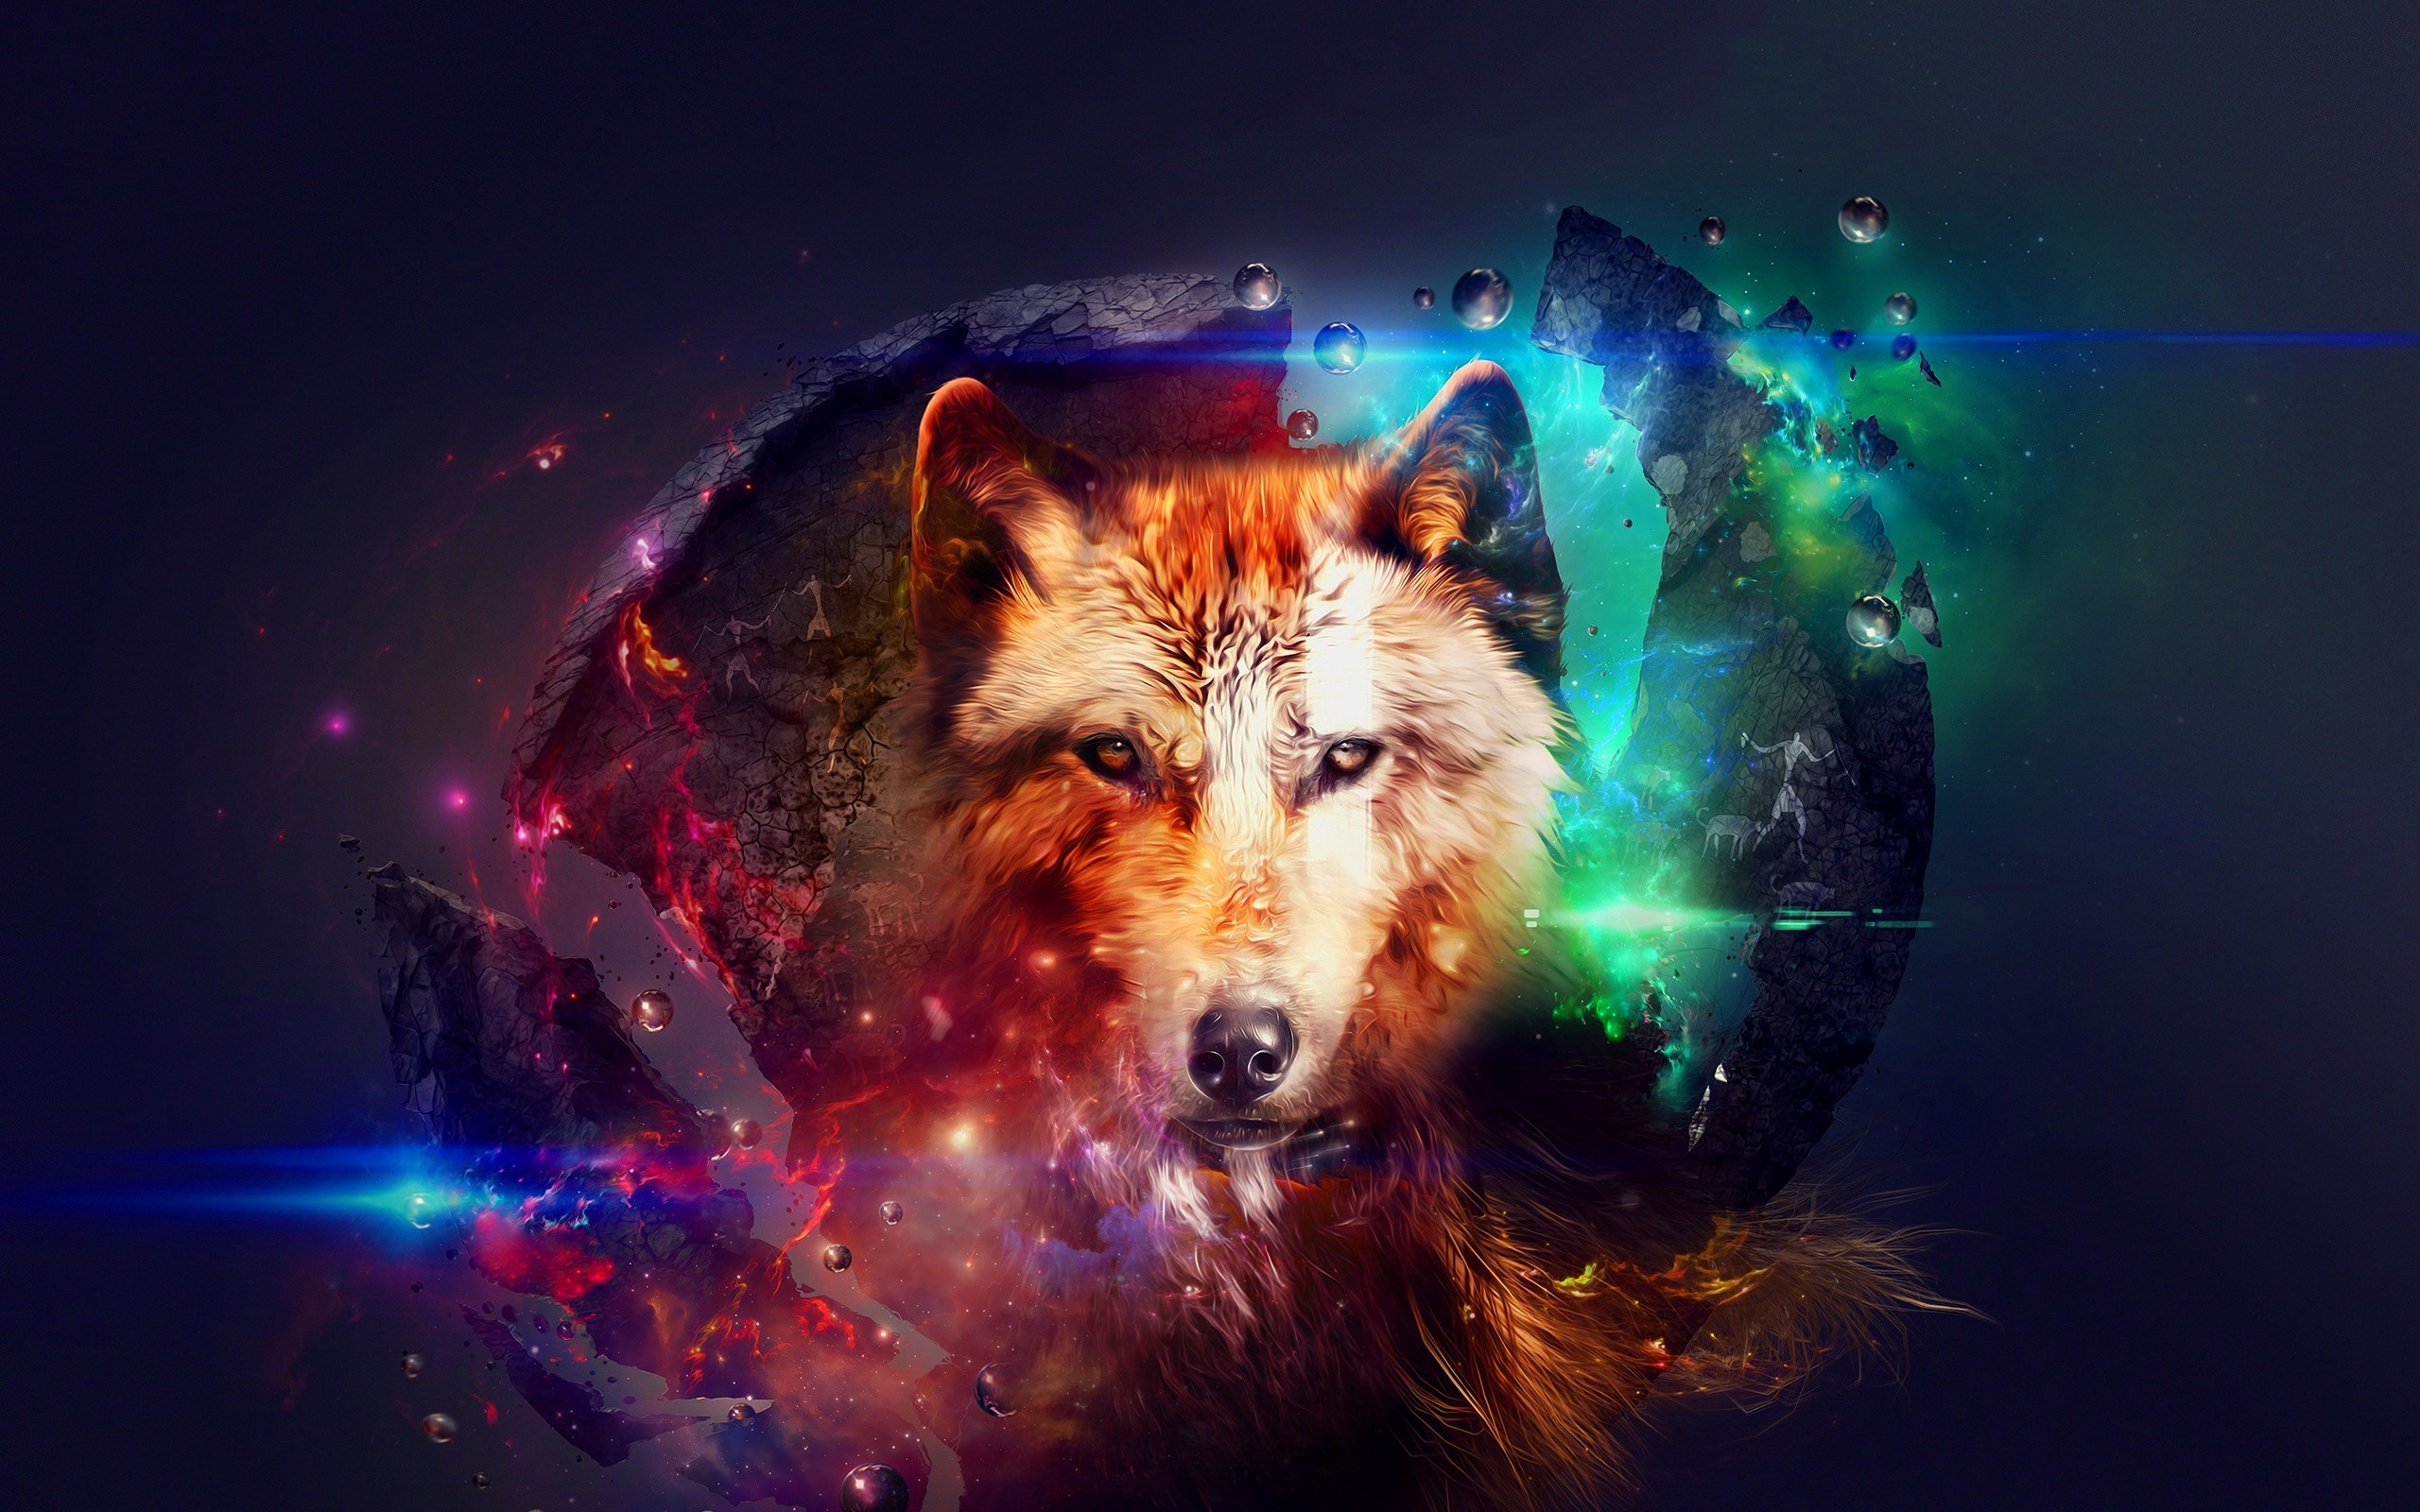 Abstract Design Wolf Collage Space Colorful hd wallpaper by JennyMari